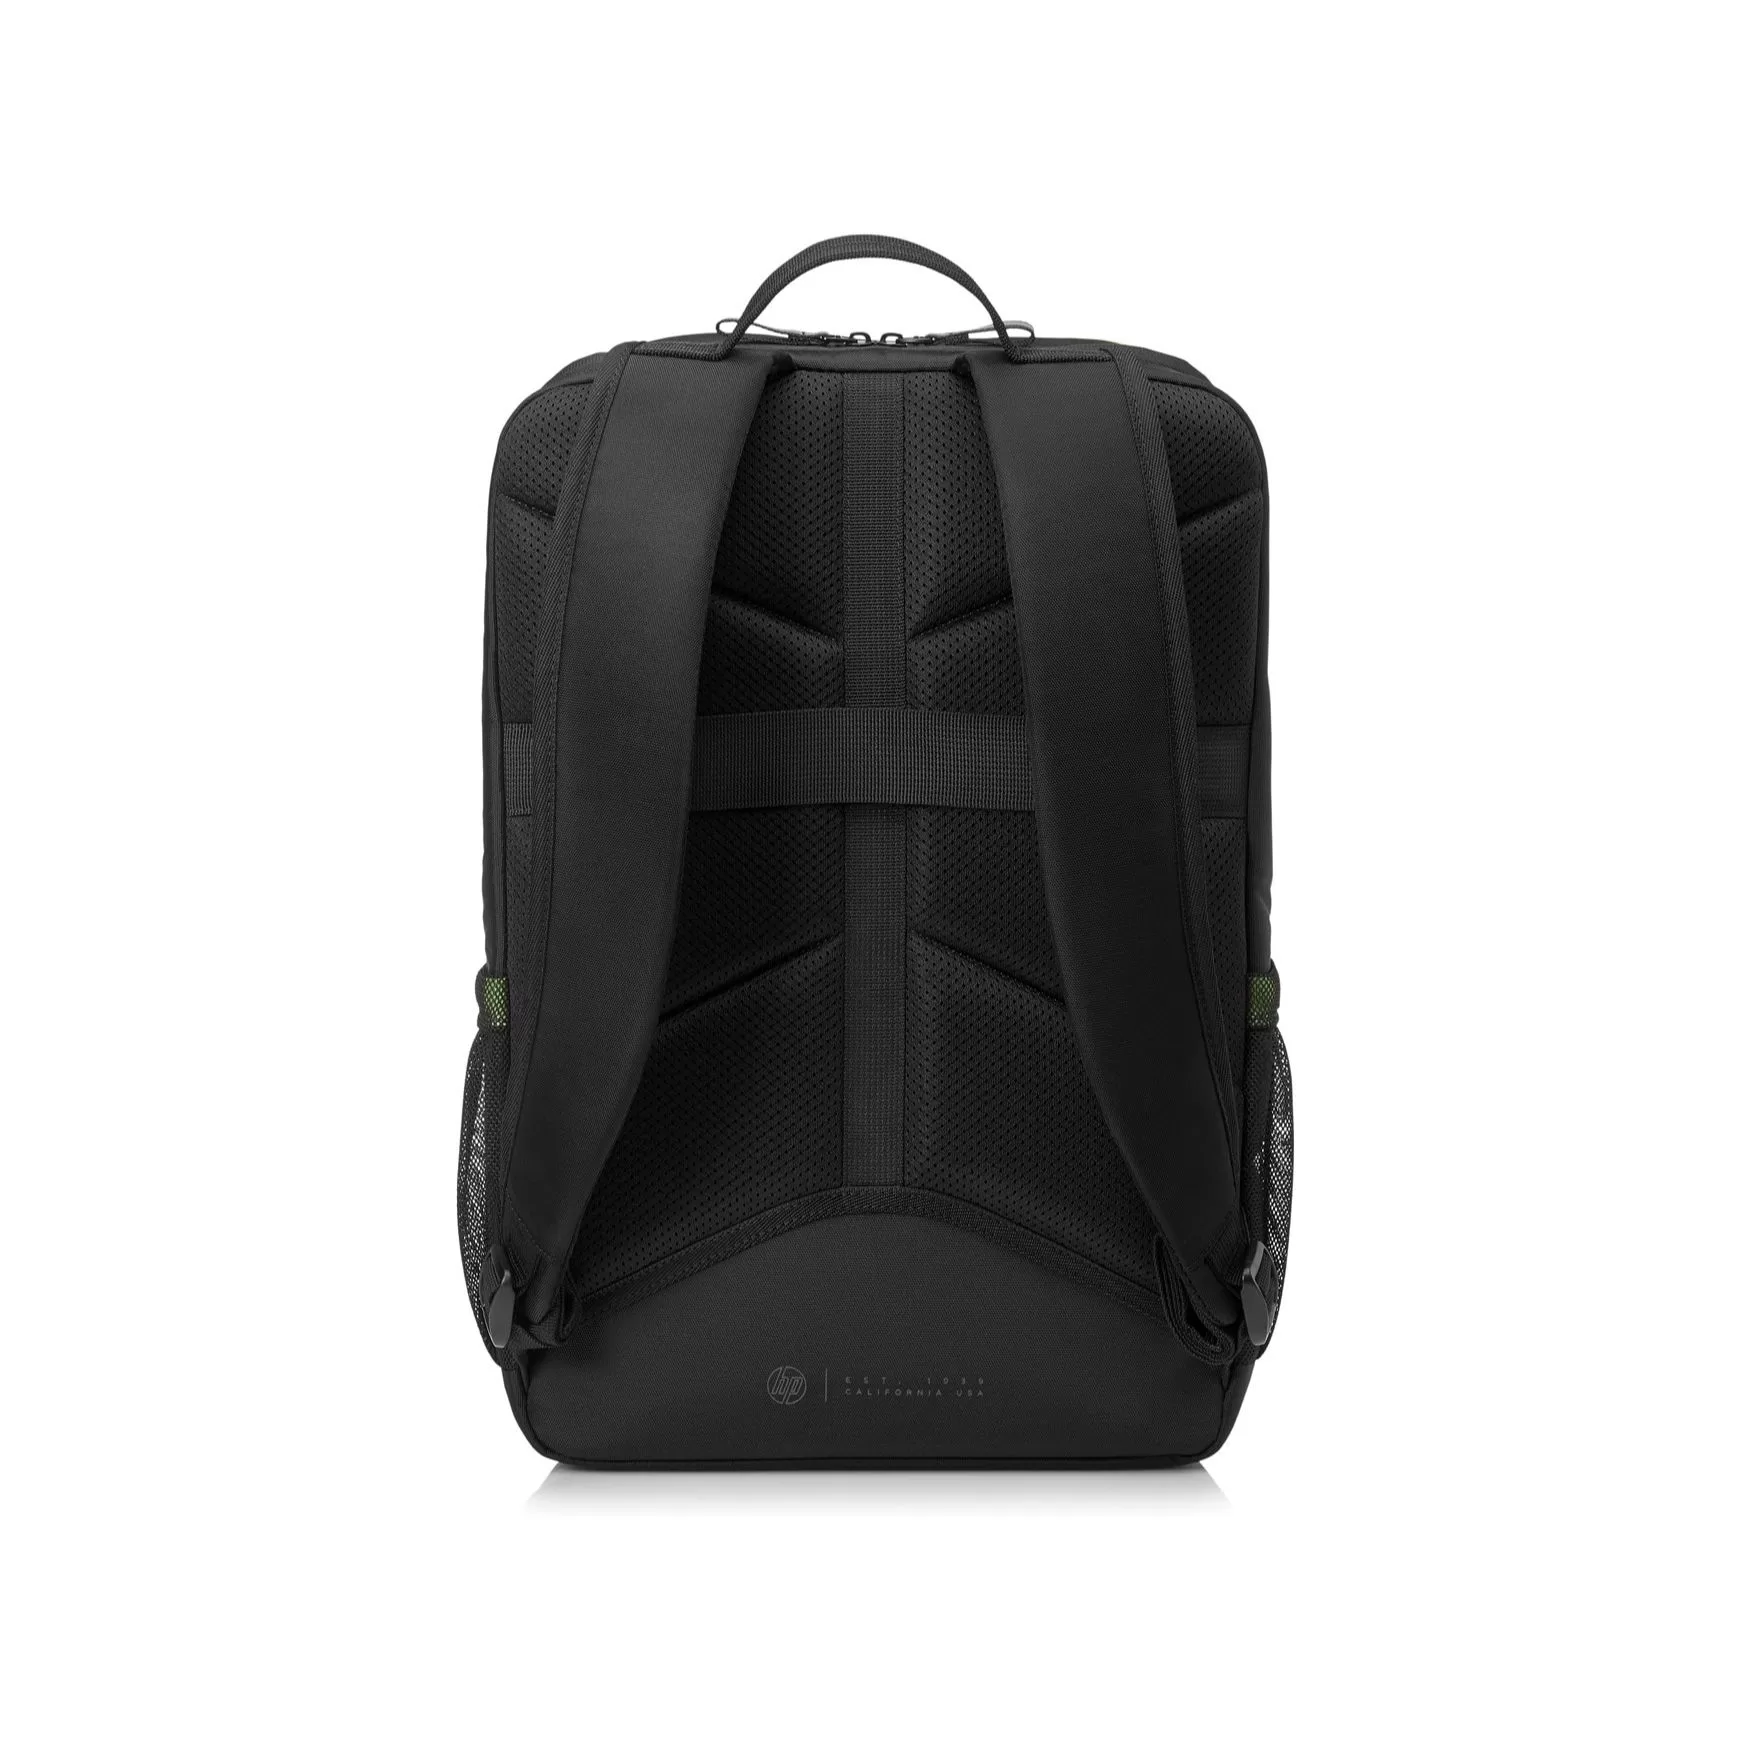 HP Pavilion Gaming Backpack 6EU57AA, 15.6 Inch Accessories 10